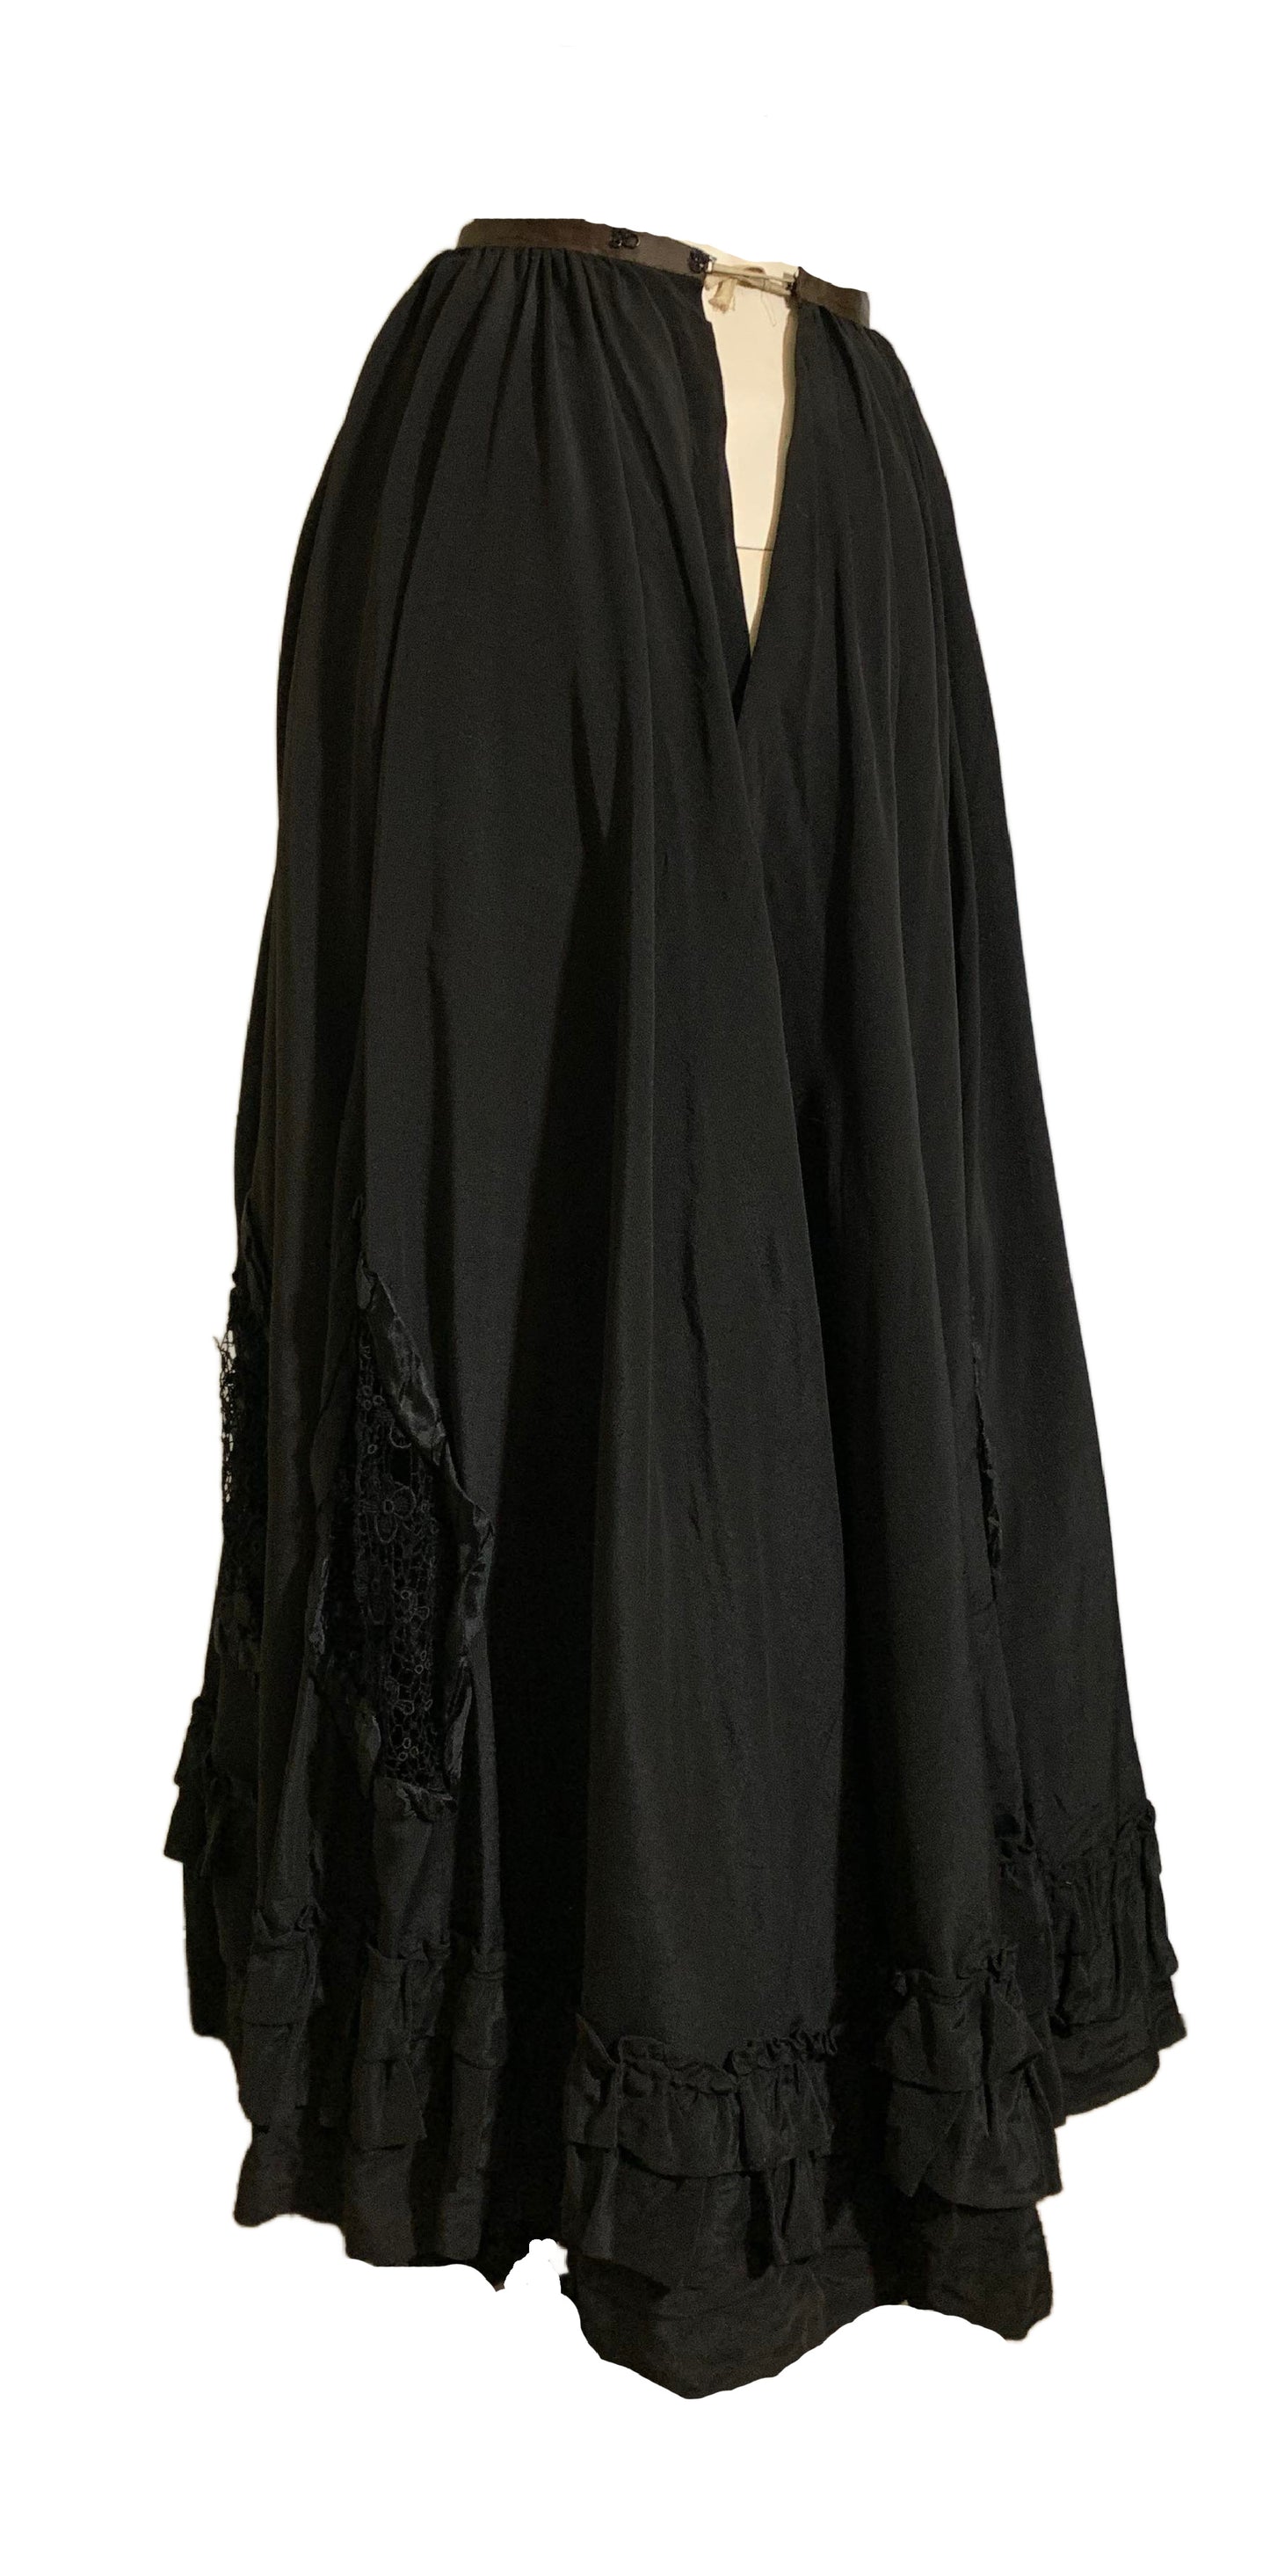 Black Faille Lace and Bow Trimmed Two Piece Mourning Dress and Hat circa 1910s